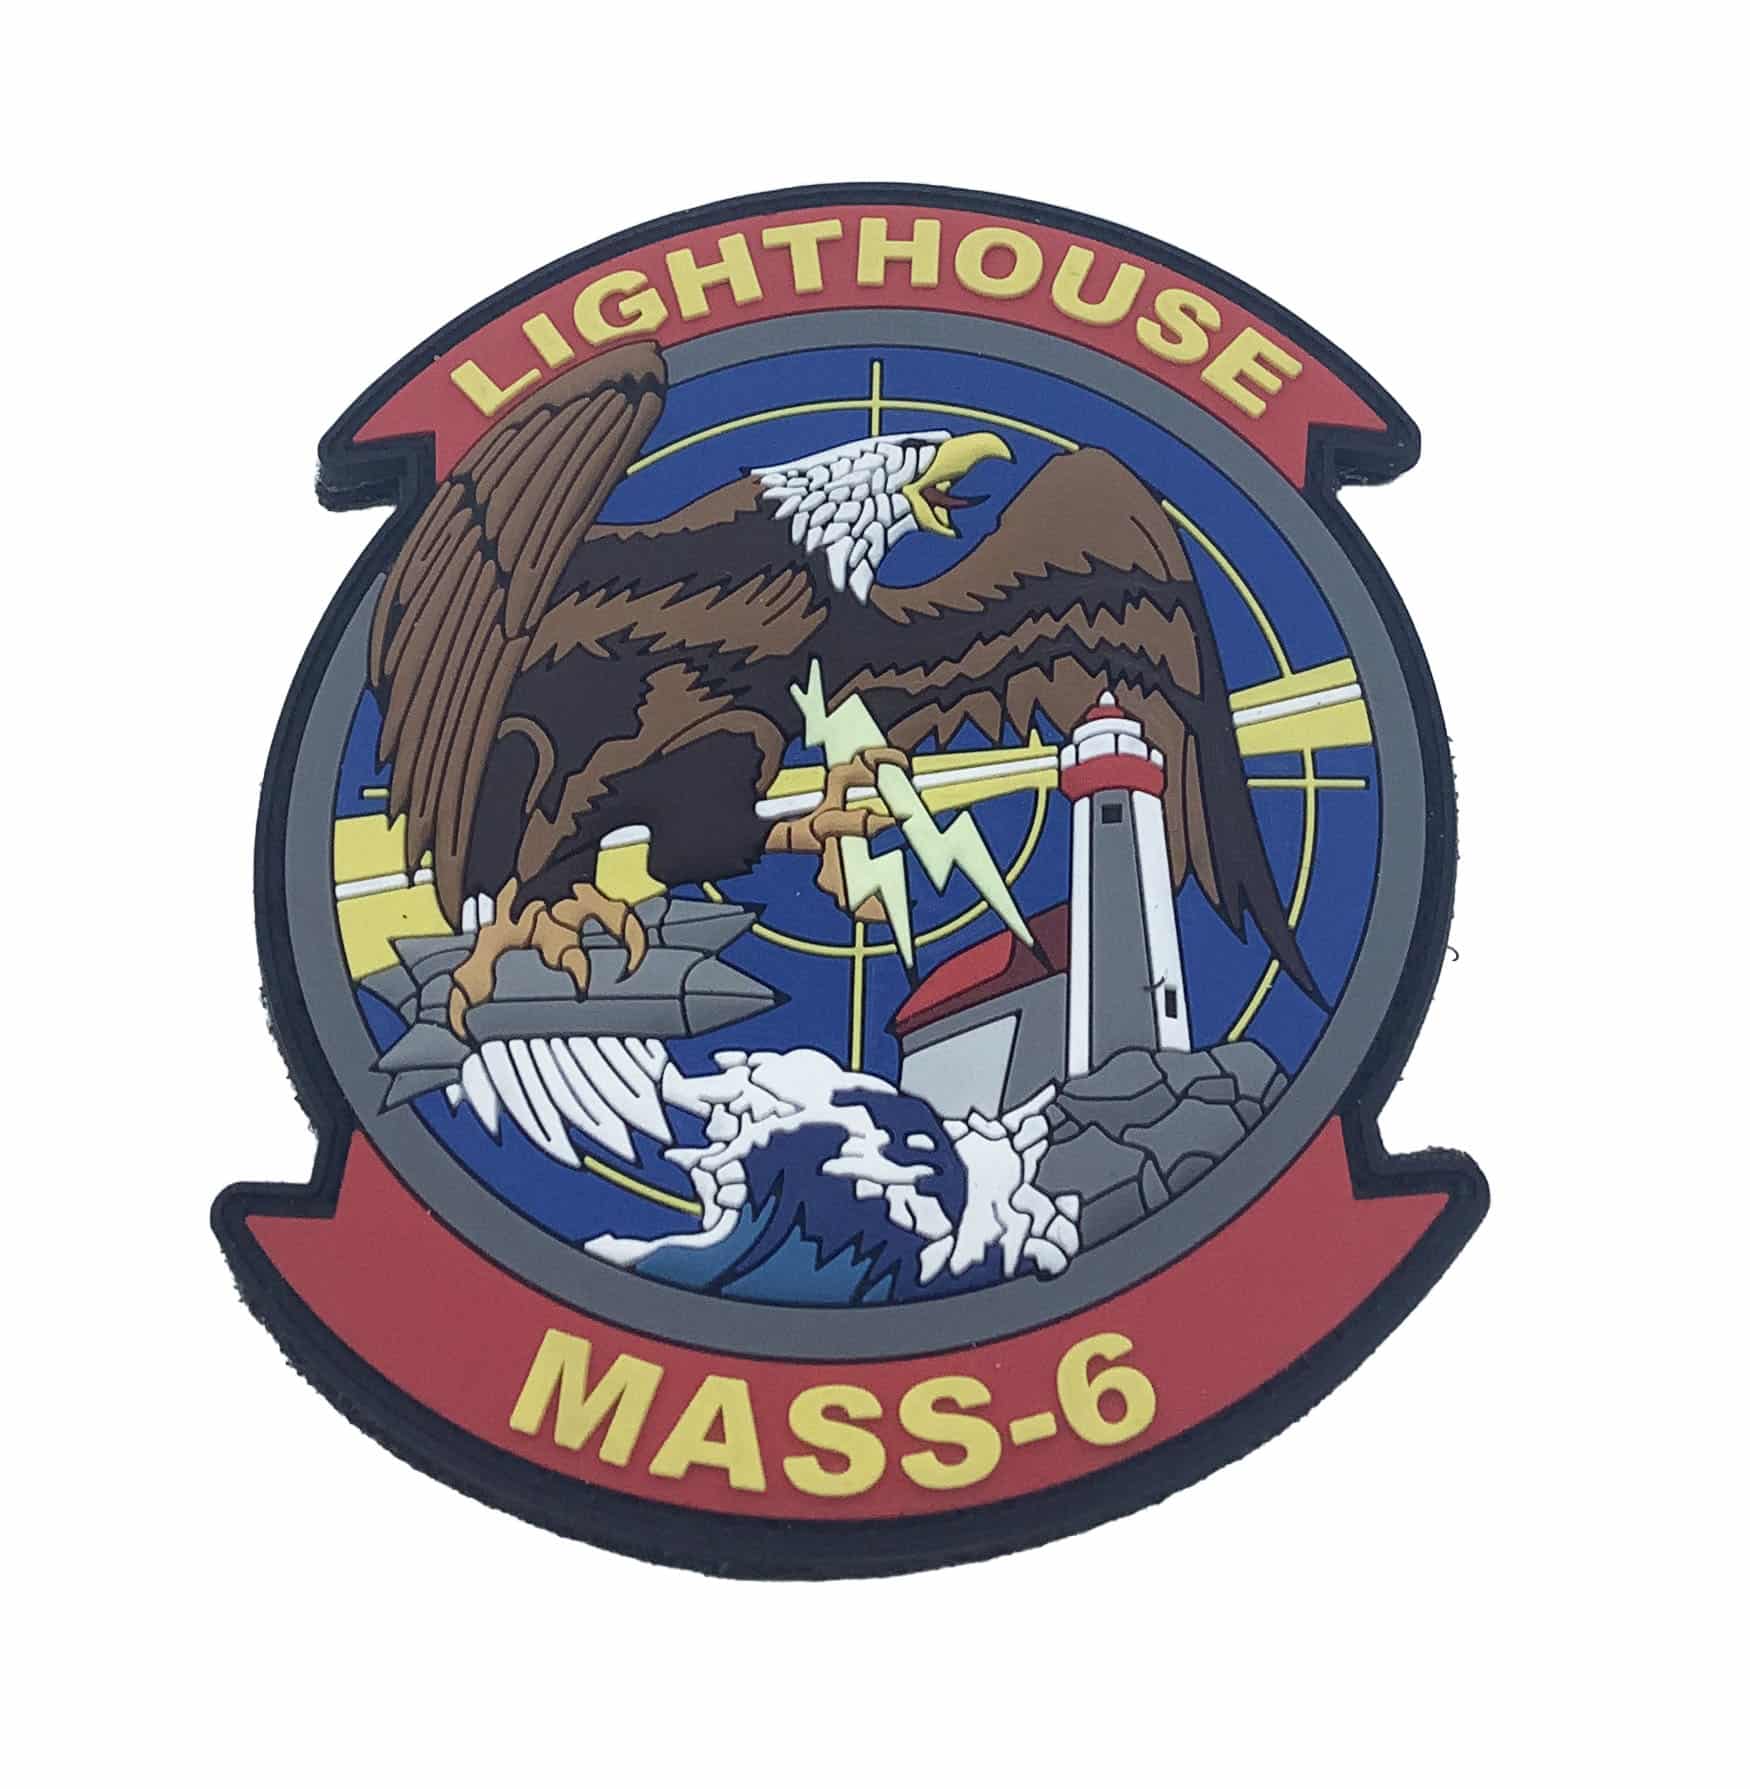 MASS-6 Det B Lighthouse PVC Patch - With Hook and Loop